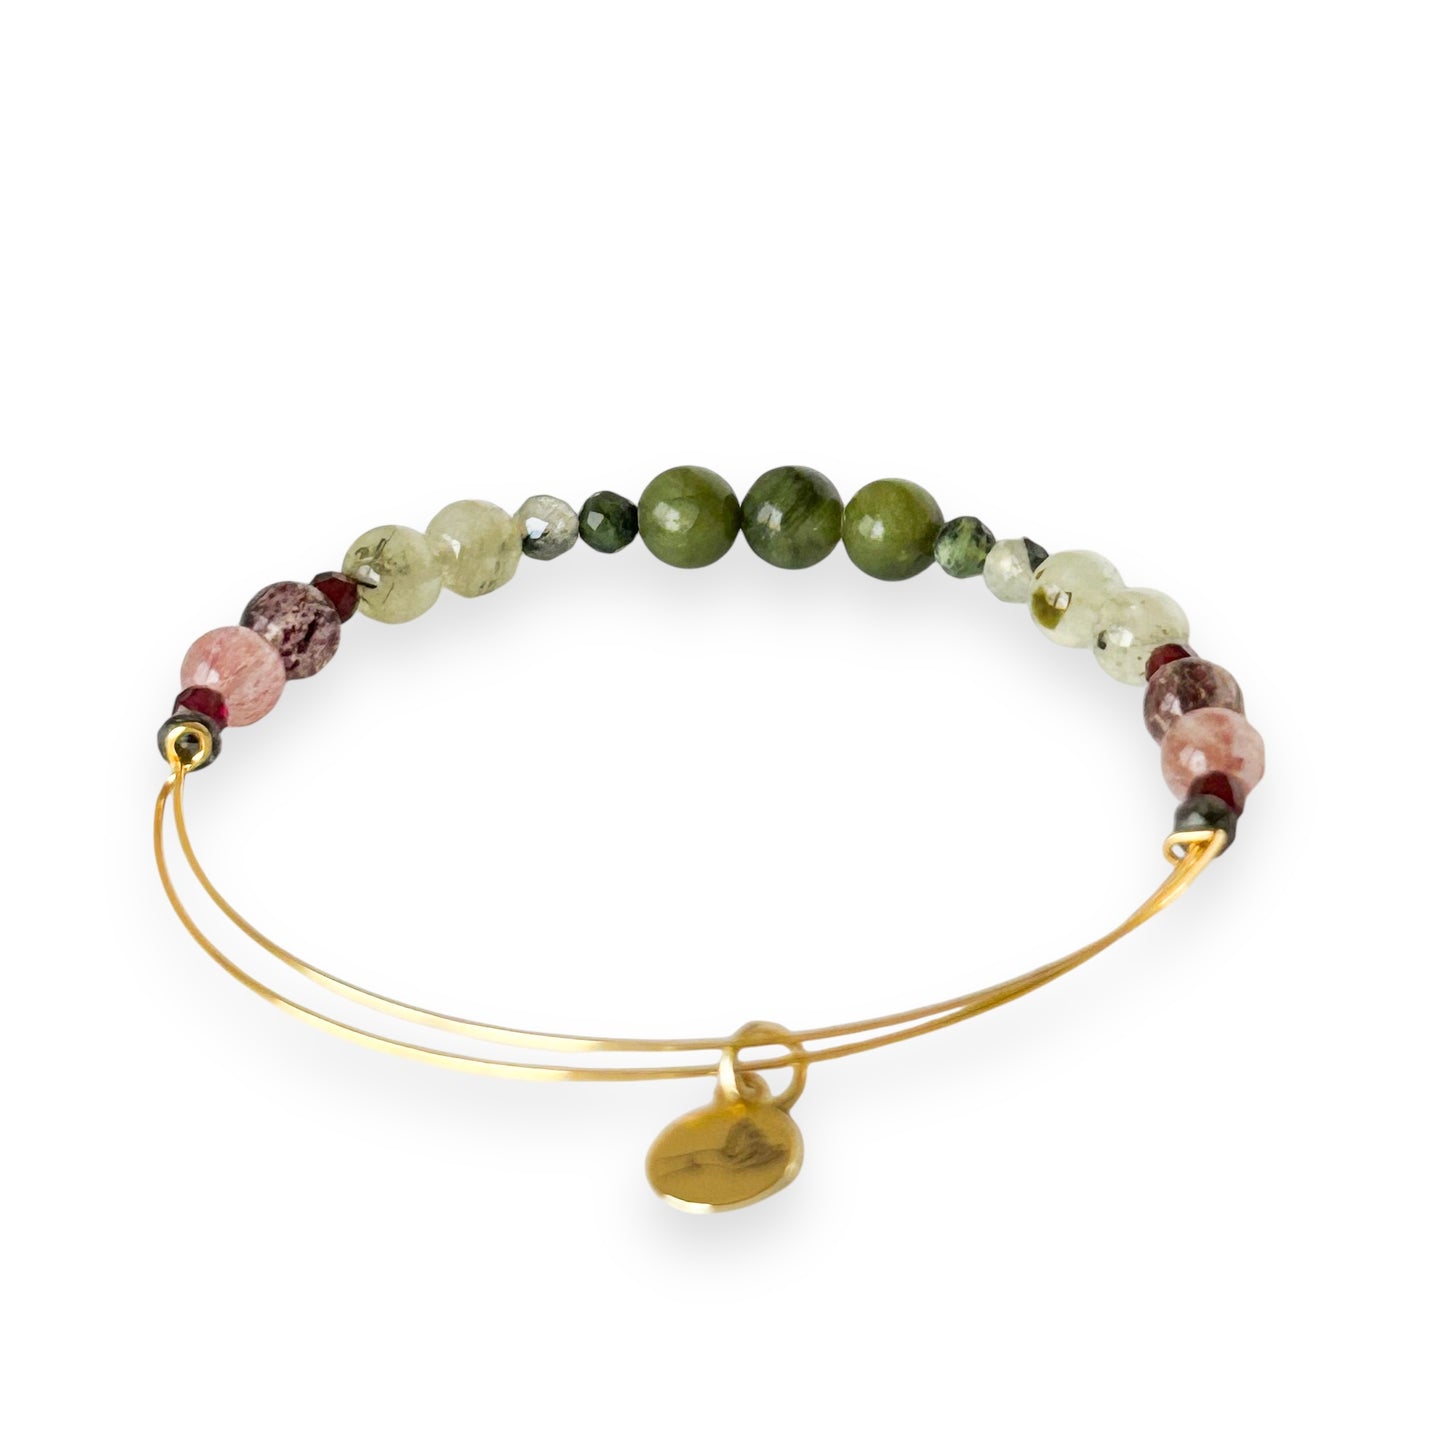 Unleash Your Inner Strength with the Tenacity Bangle